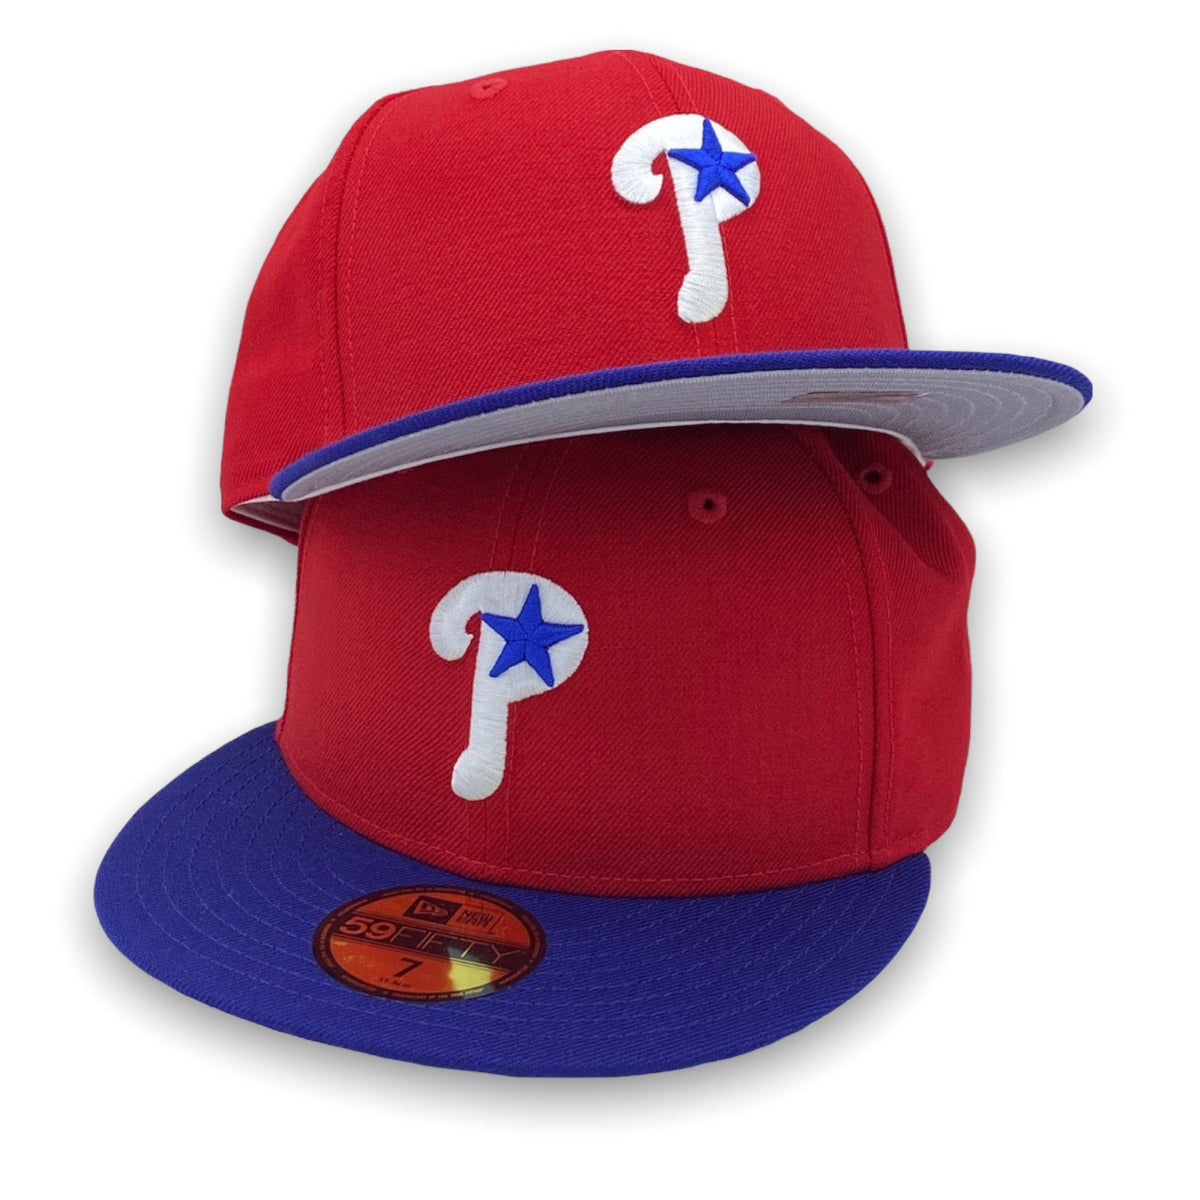 phillies hat red